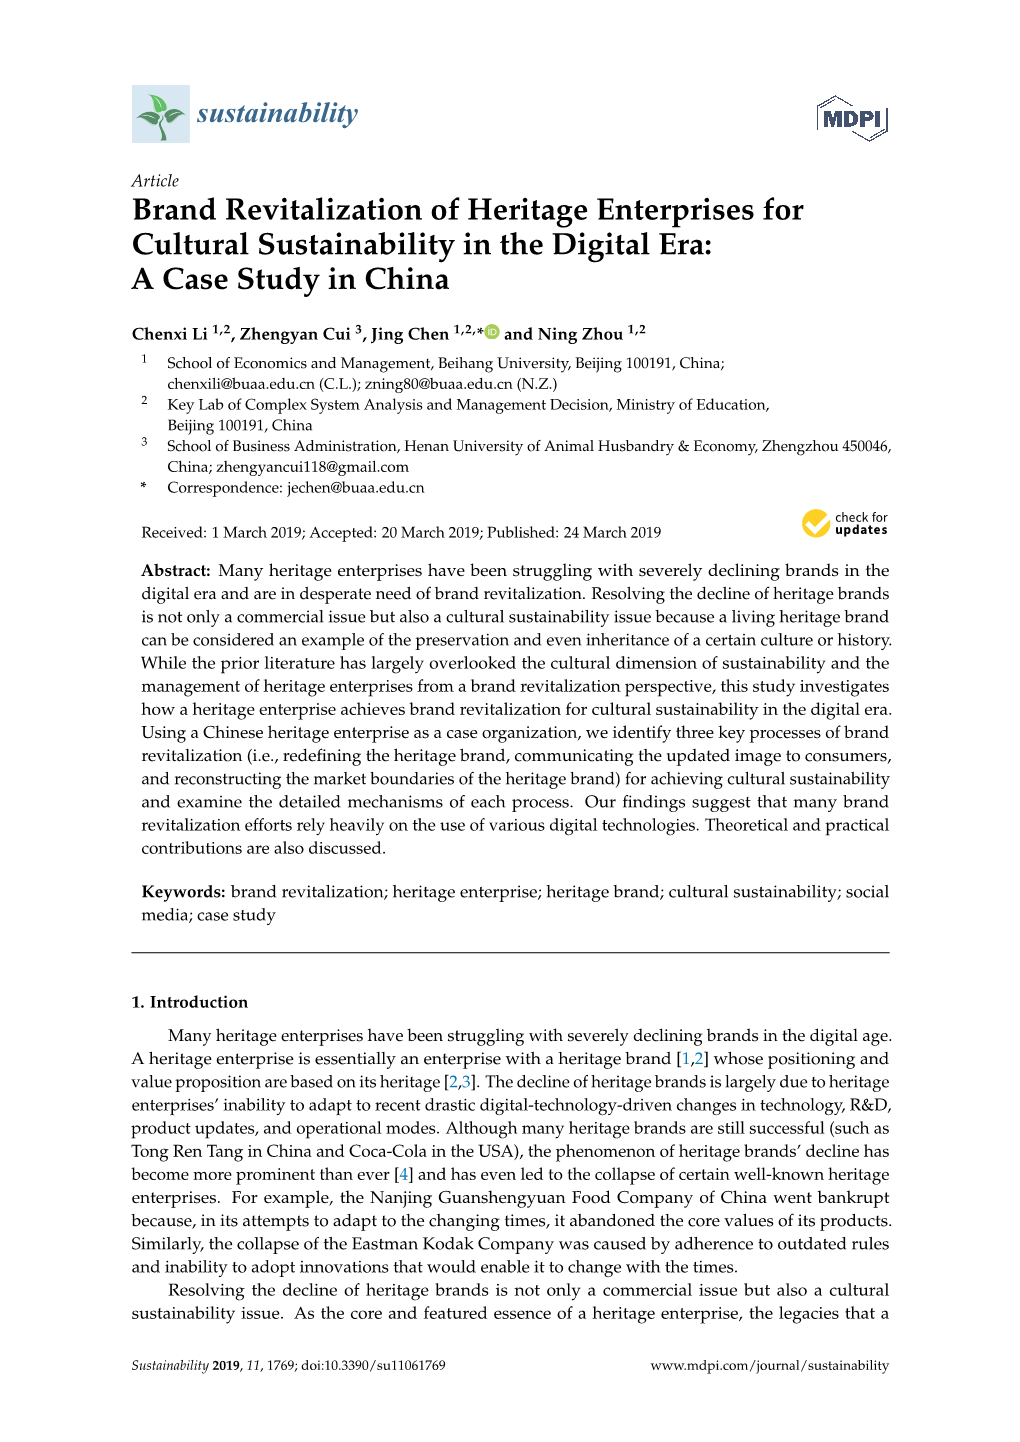 Brand Revitalization of Heritage Enterprises for Cultural Sustainability in the Digital Era: a Case Study in China